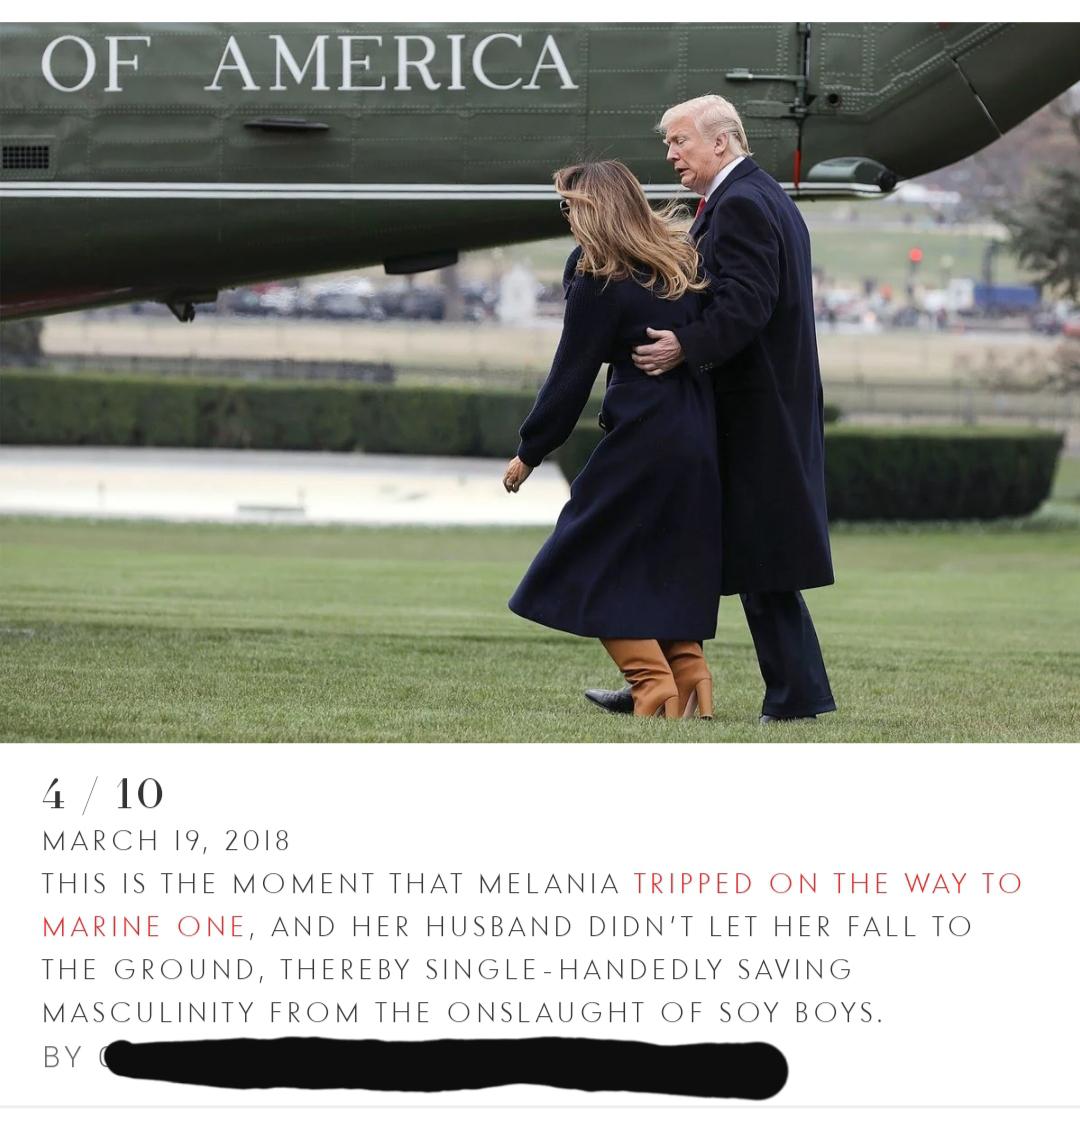 melania trump affection - Of America 4 This Is The Moment That Melania Tripped On The Way To Marine One, And Her Husband Didn'T Let Her Fall To The Ground, Thereby SingleHandedly Saving Masculinity From The Onslaught Of Soy Boys. By